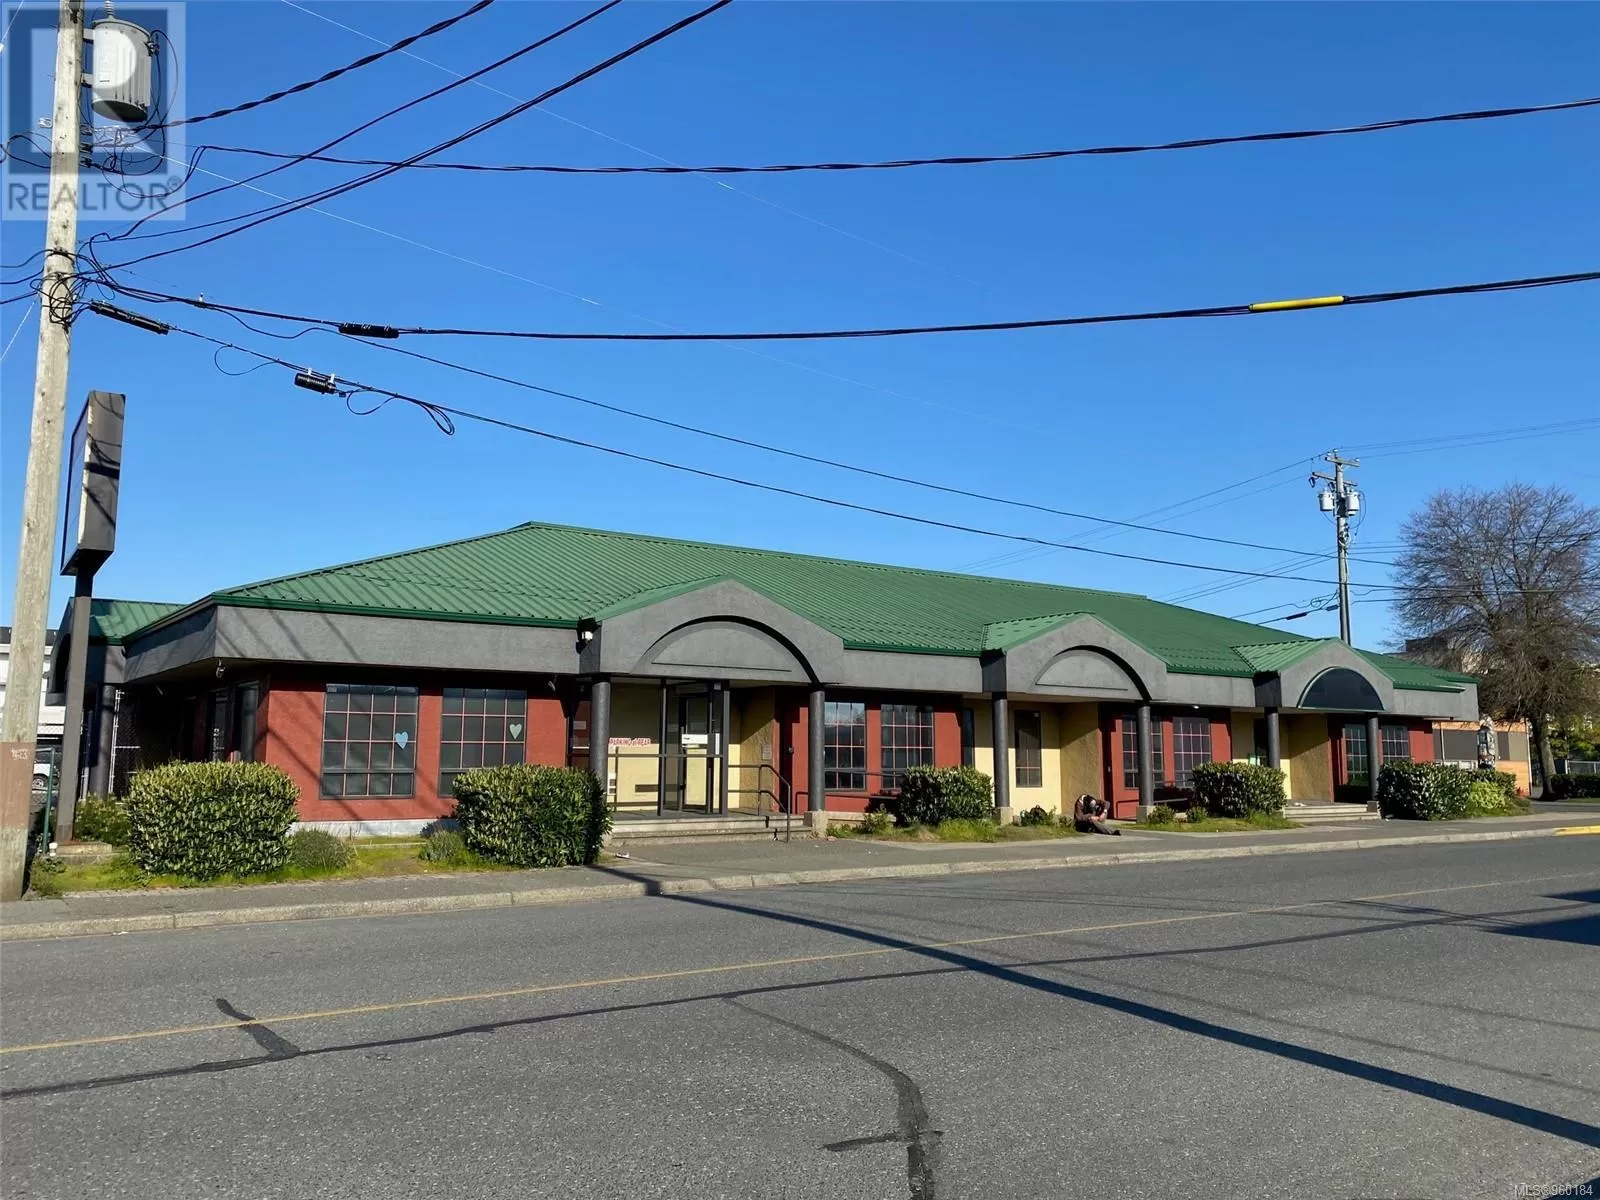 Commercial Mix for rent: B 833 14th Ave, Campbell River, British Columbia V9W 4H3